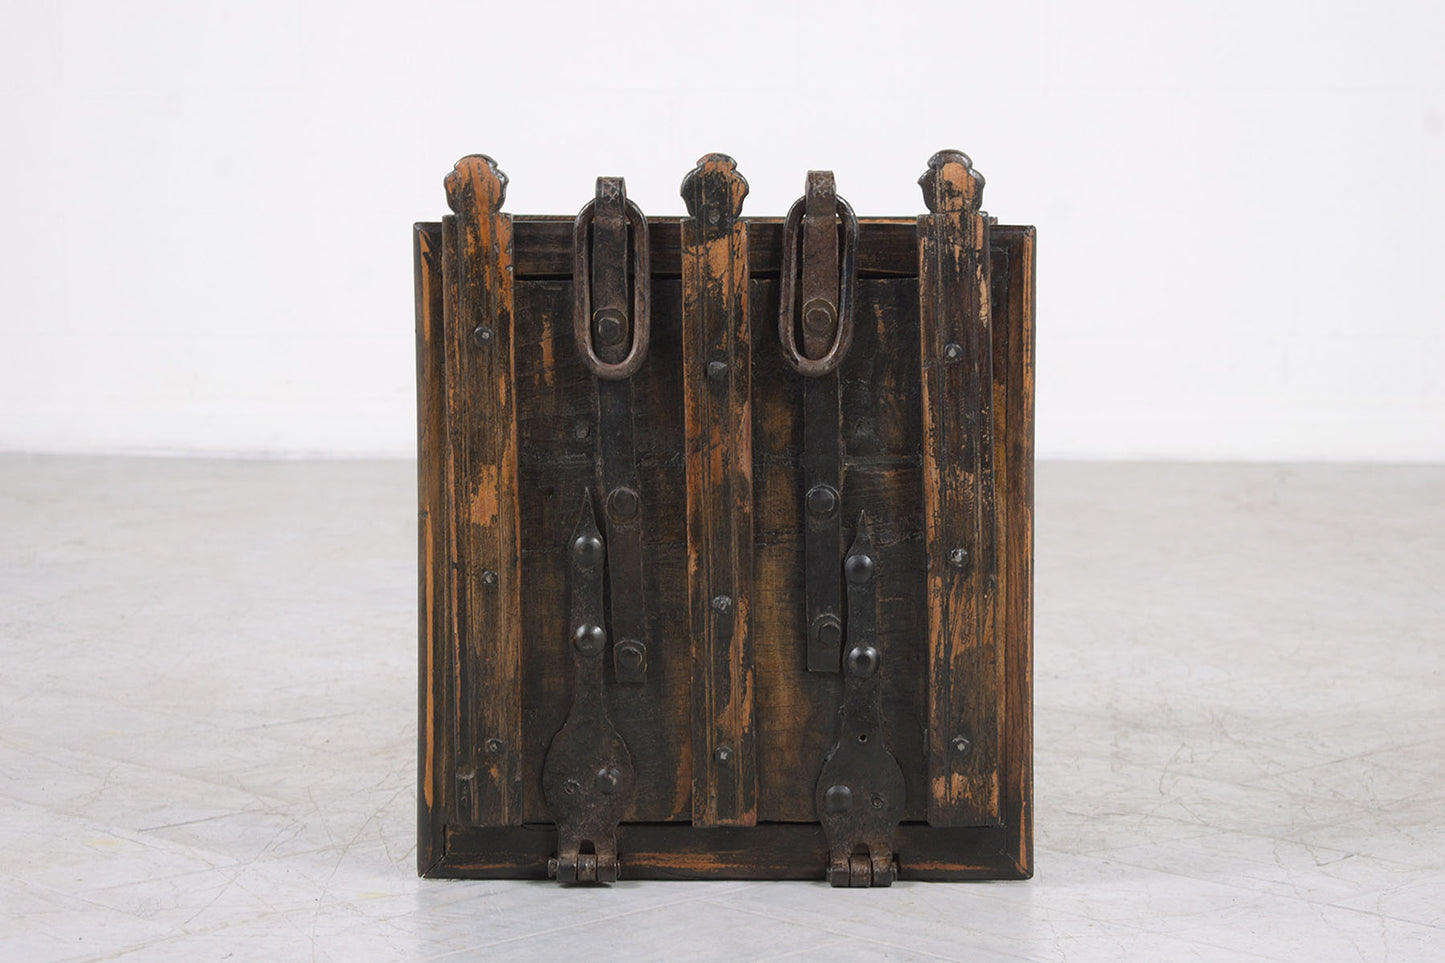 Vintage 1970s Restored Spanish-Style Wooden Trunk: Elegance Meets Practicality